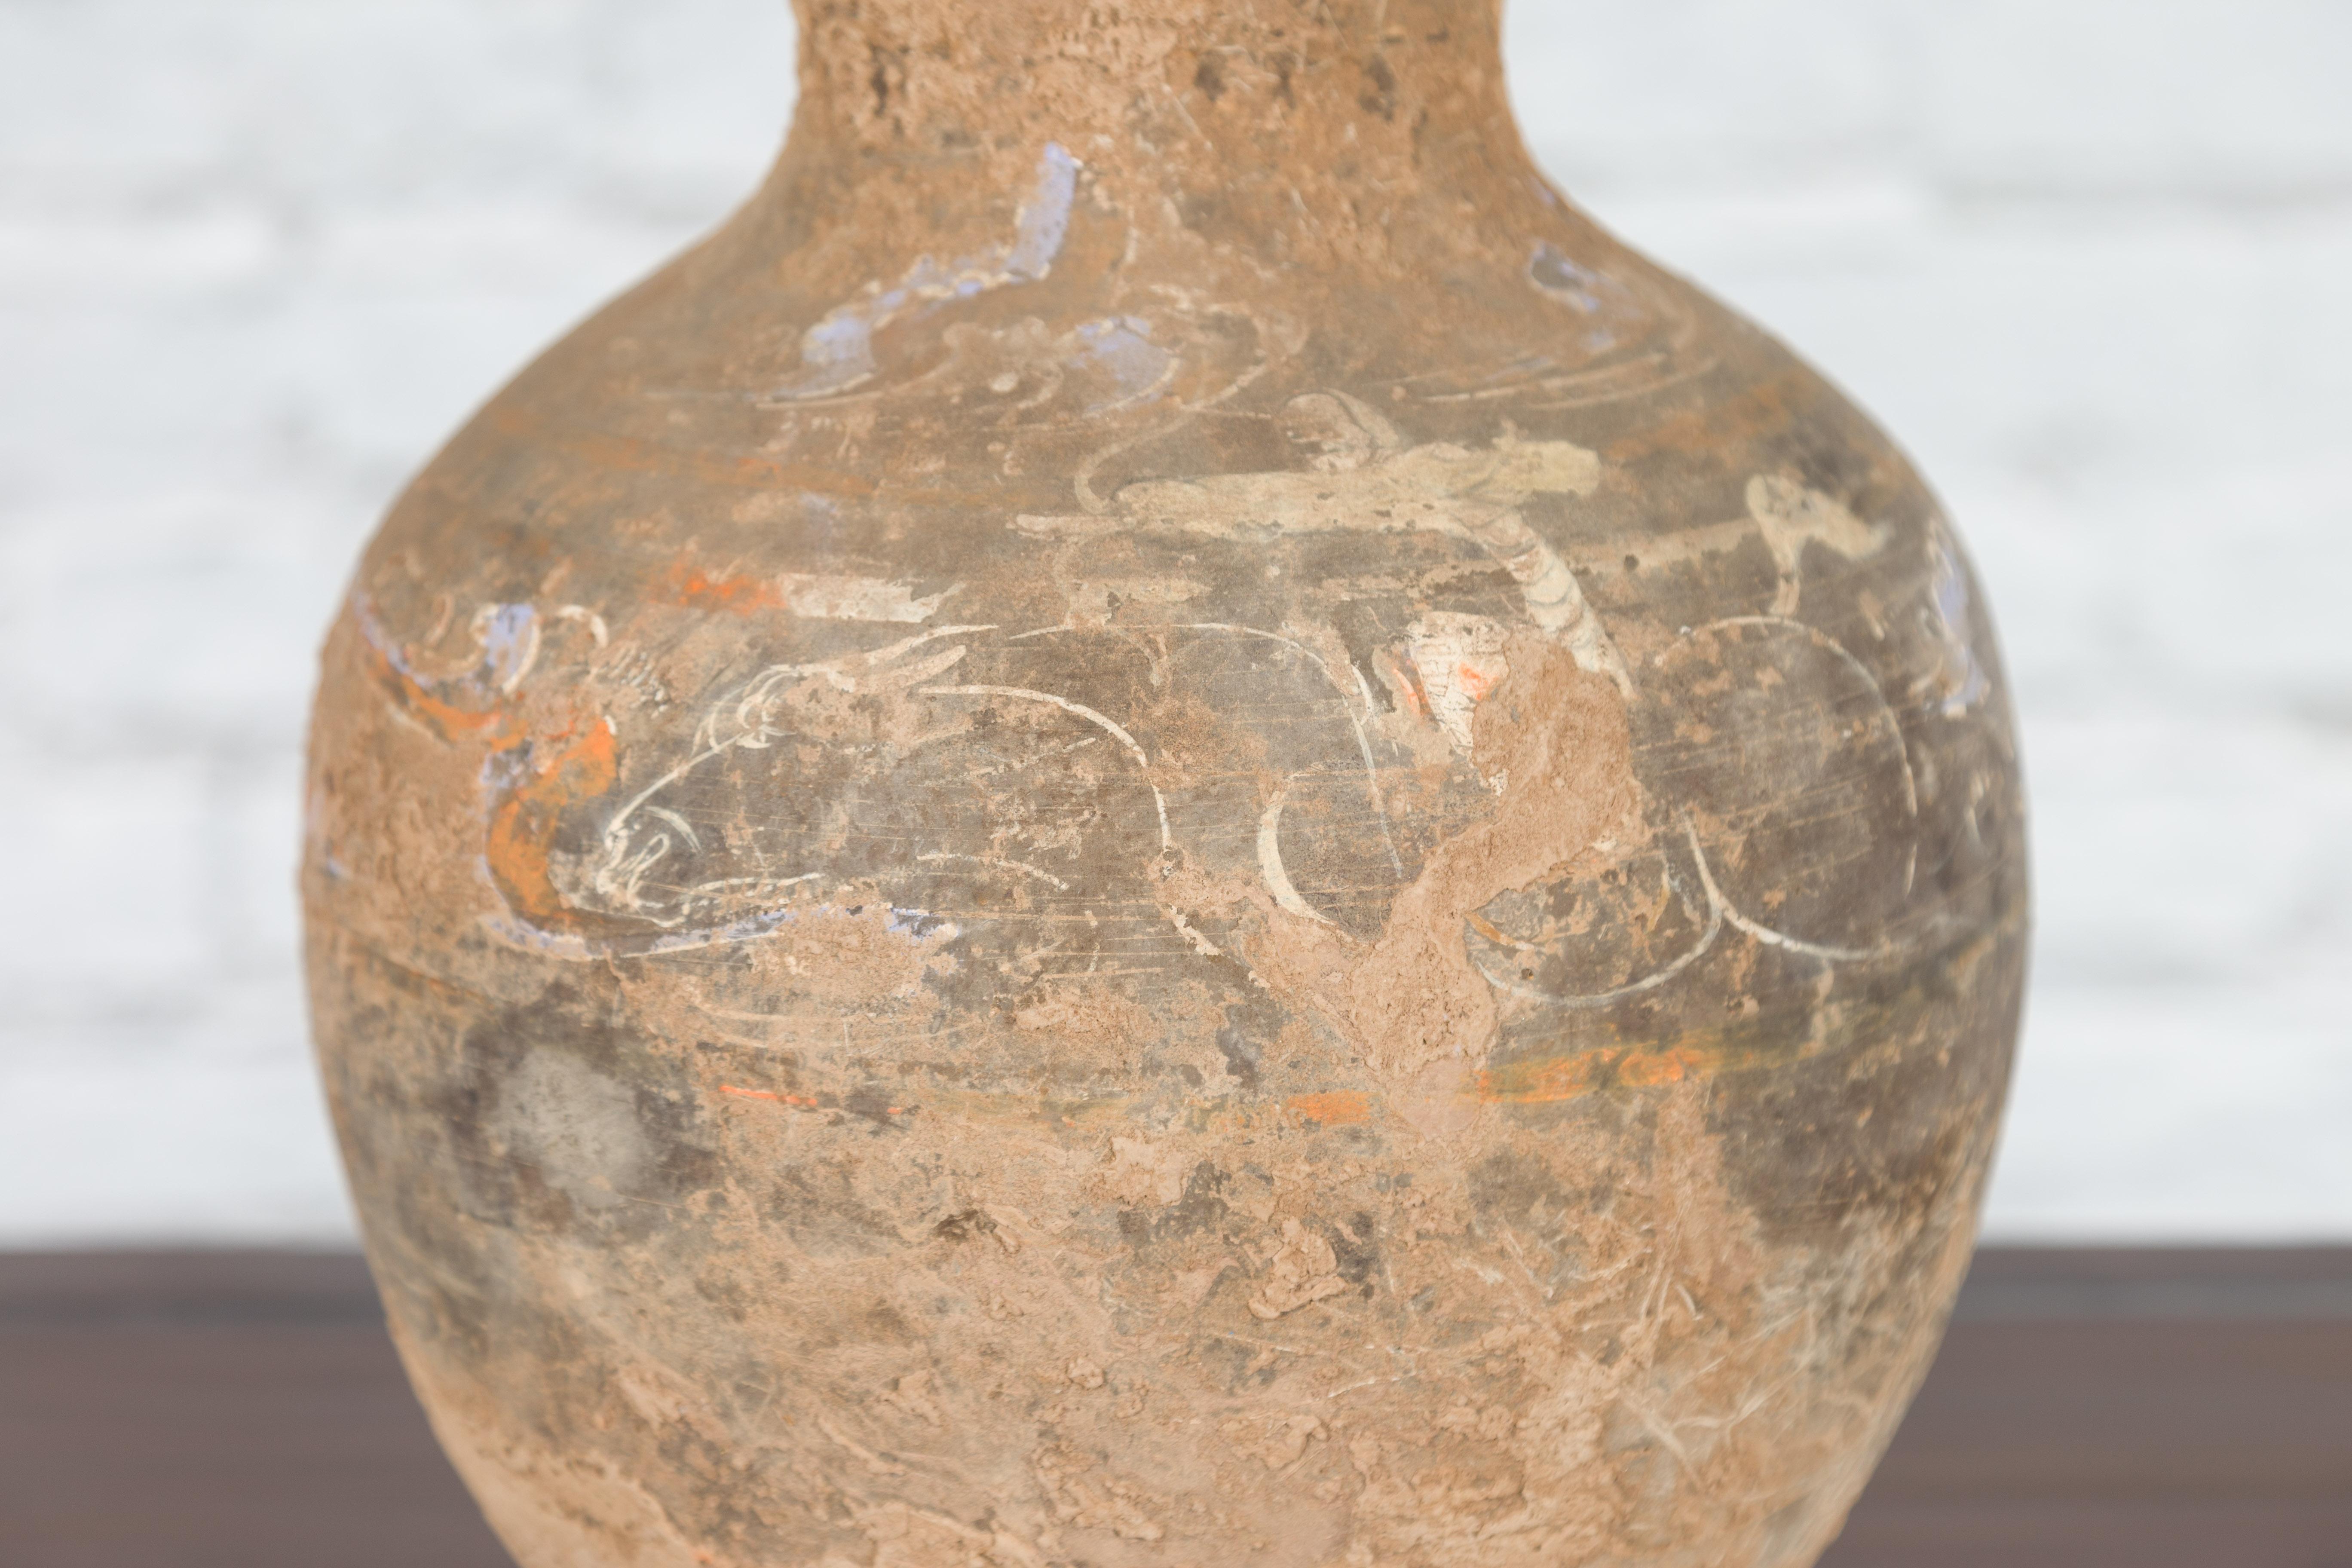 Chinese Han Dynasty Terracotta Vase with Hand-Painted Décor, circa 202 BC-200 AD 2